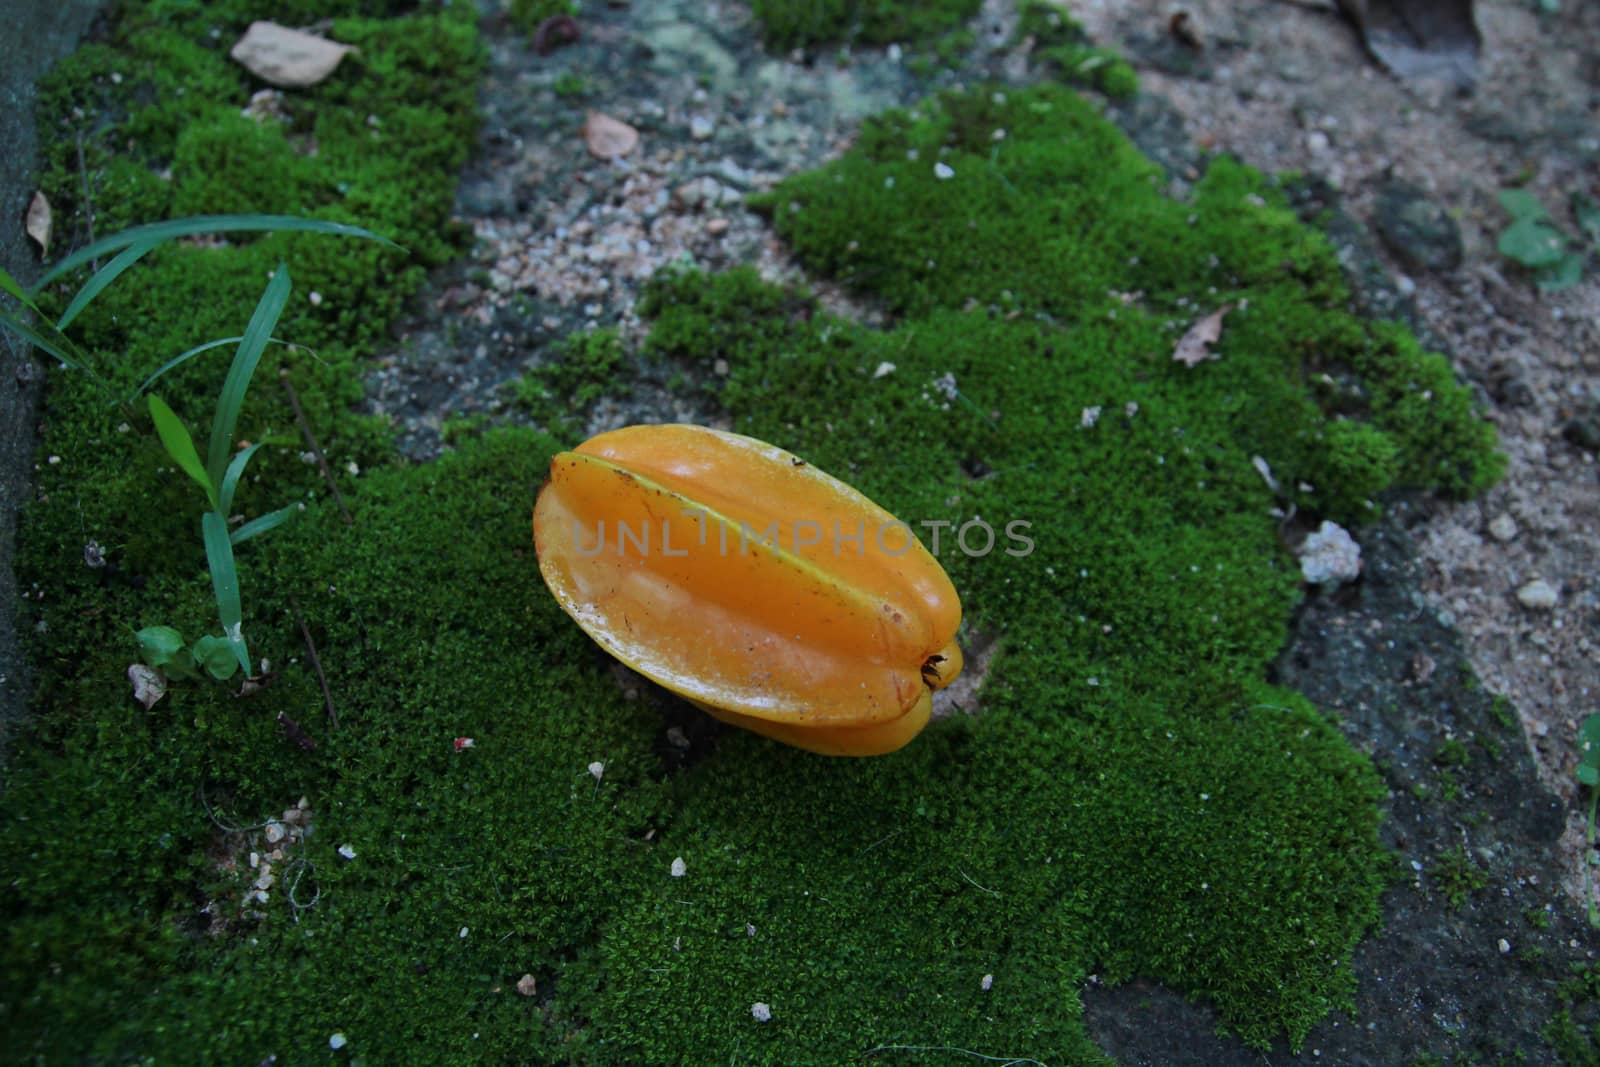 The ripe star apple is falling on the area is full of algae.